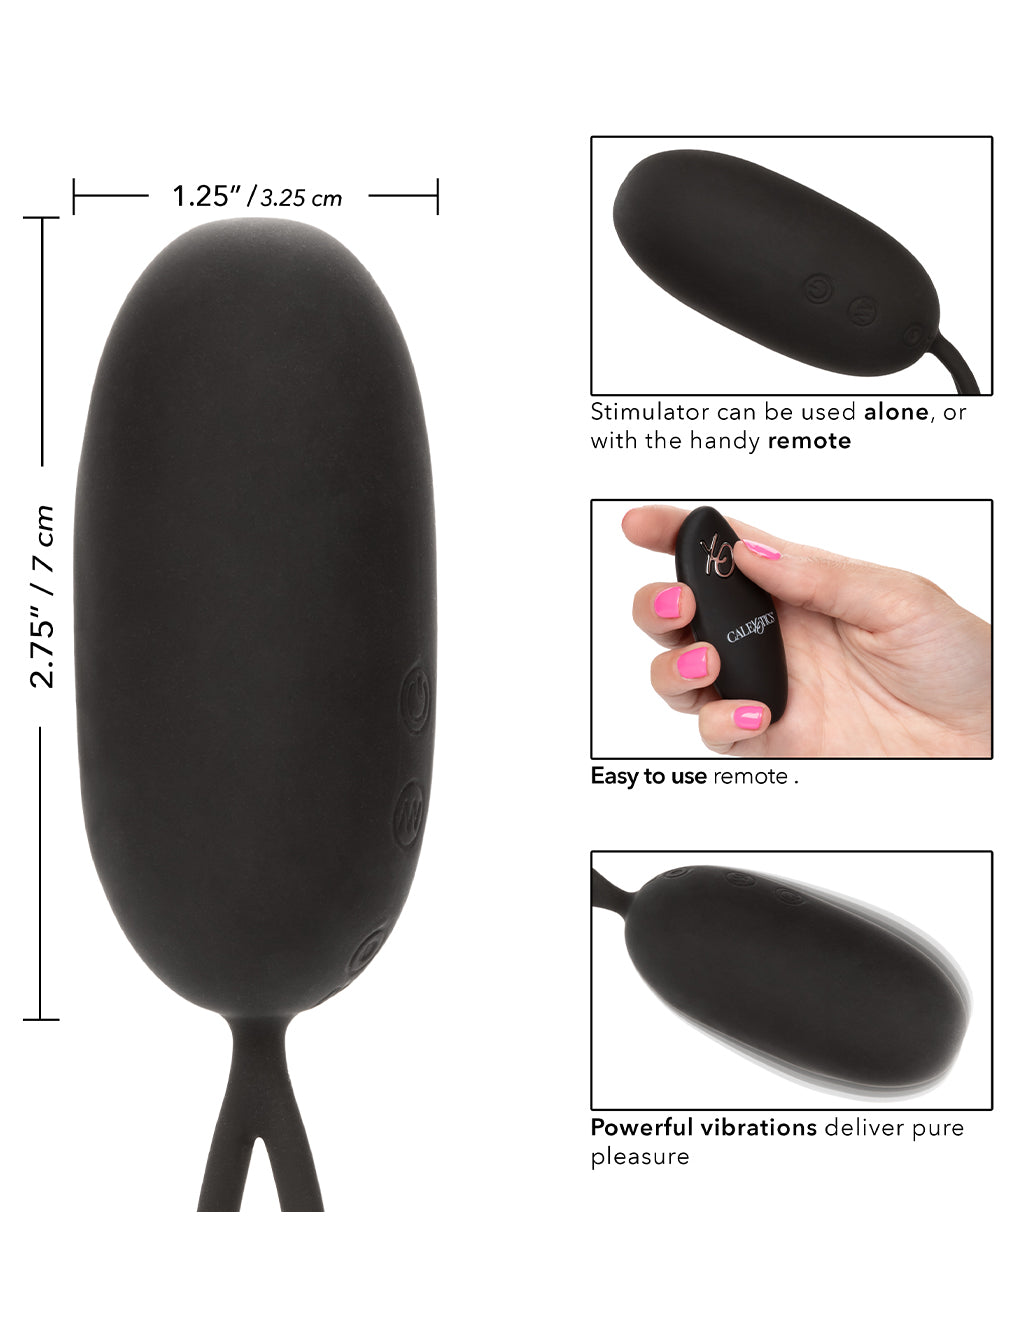 CalEx Remote Rechargeable Egg- Size Dimensions